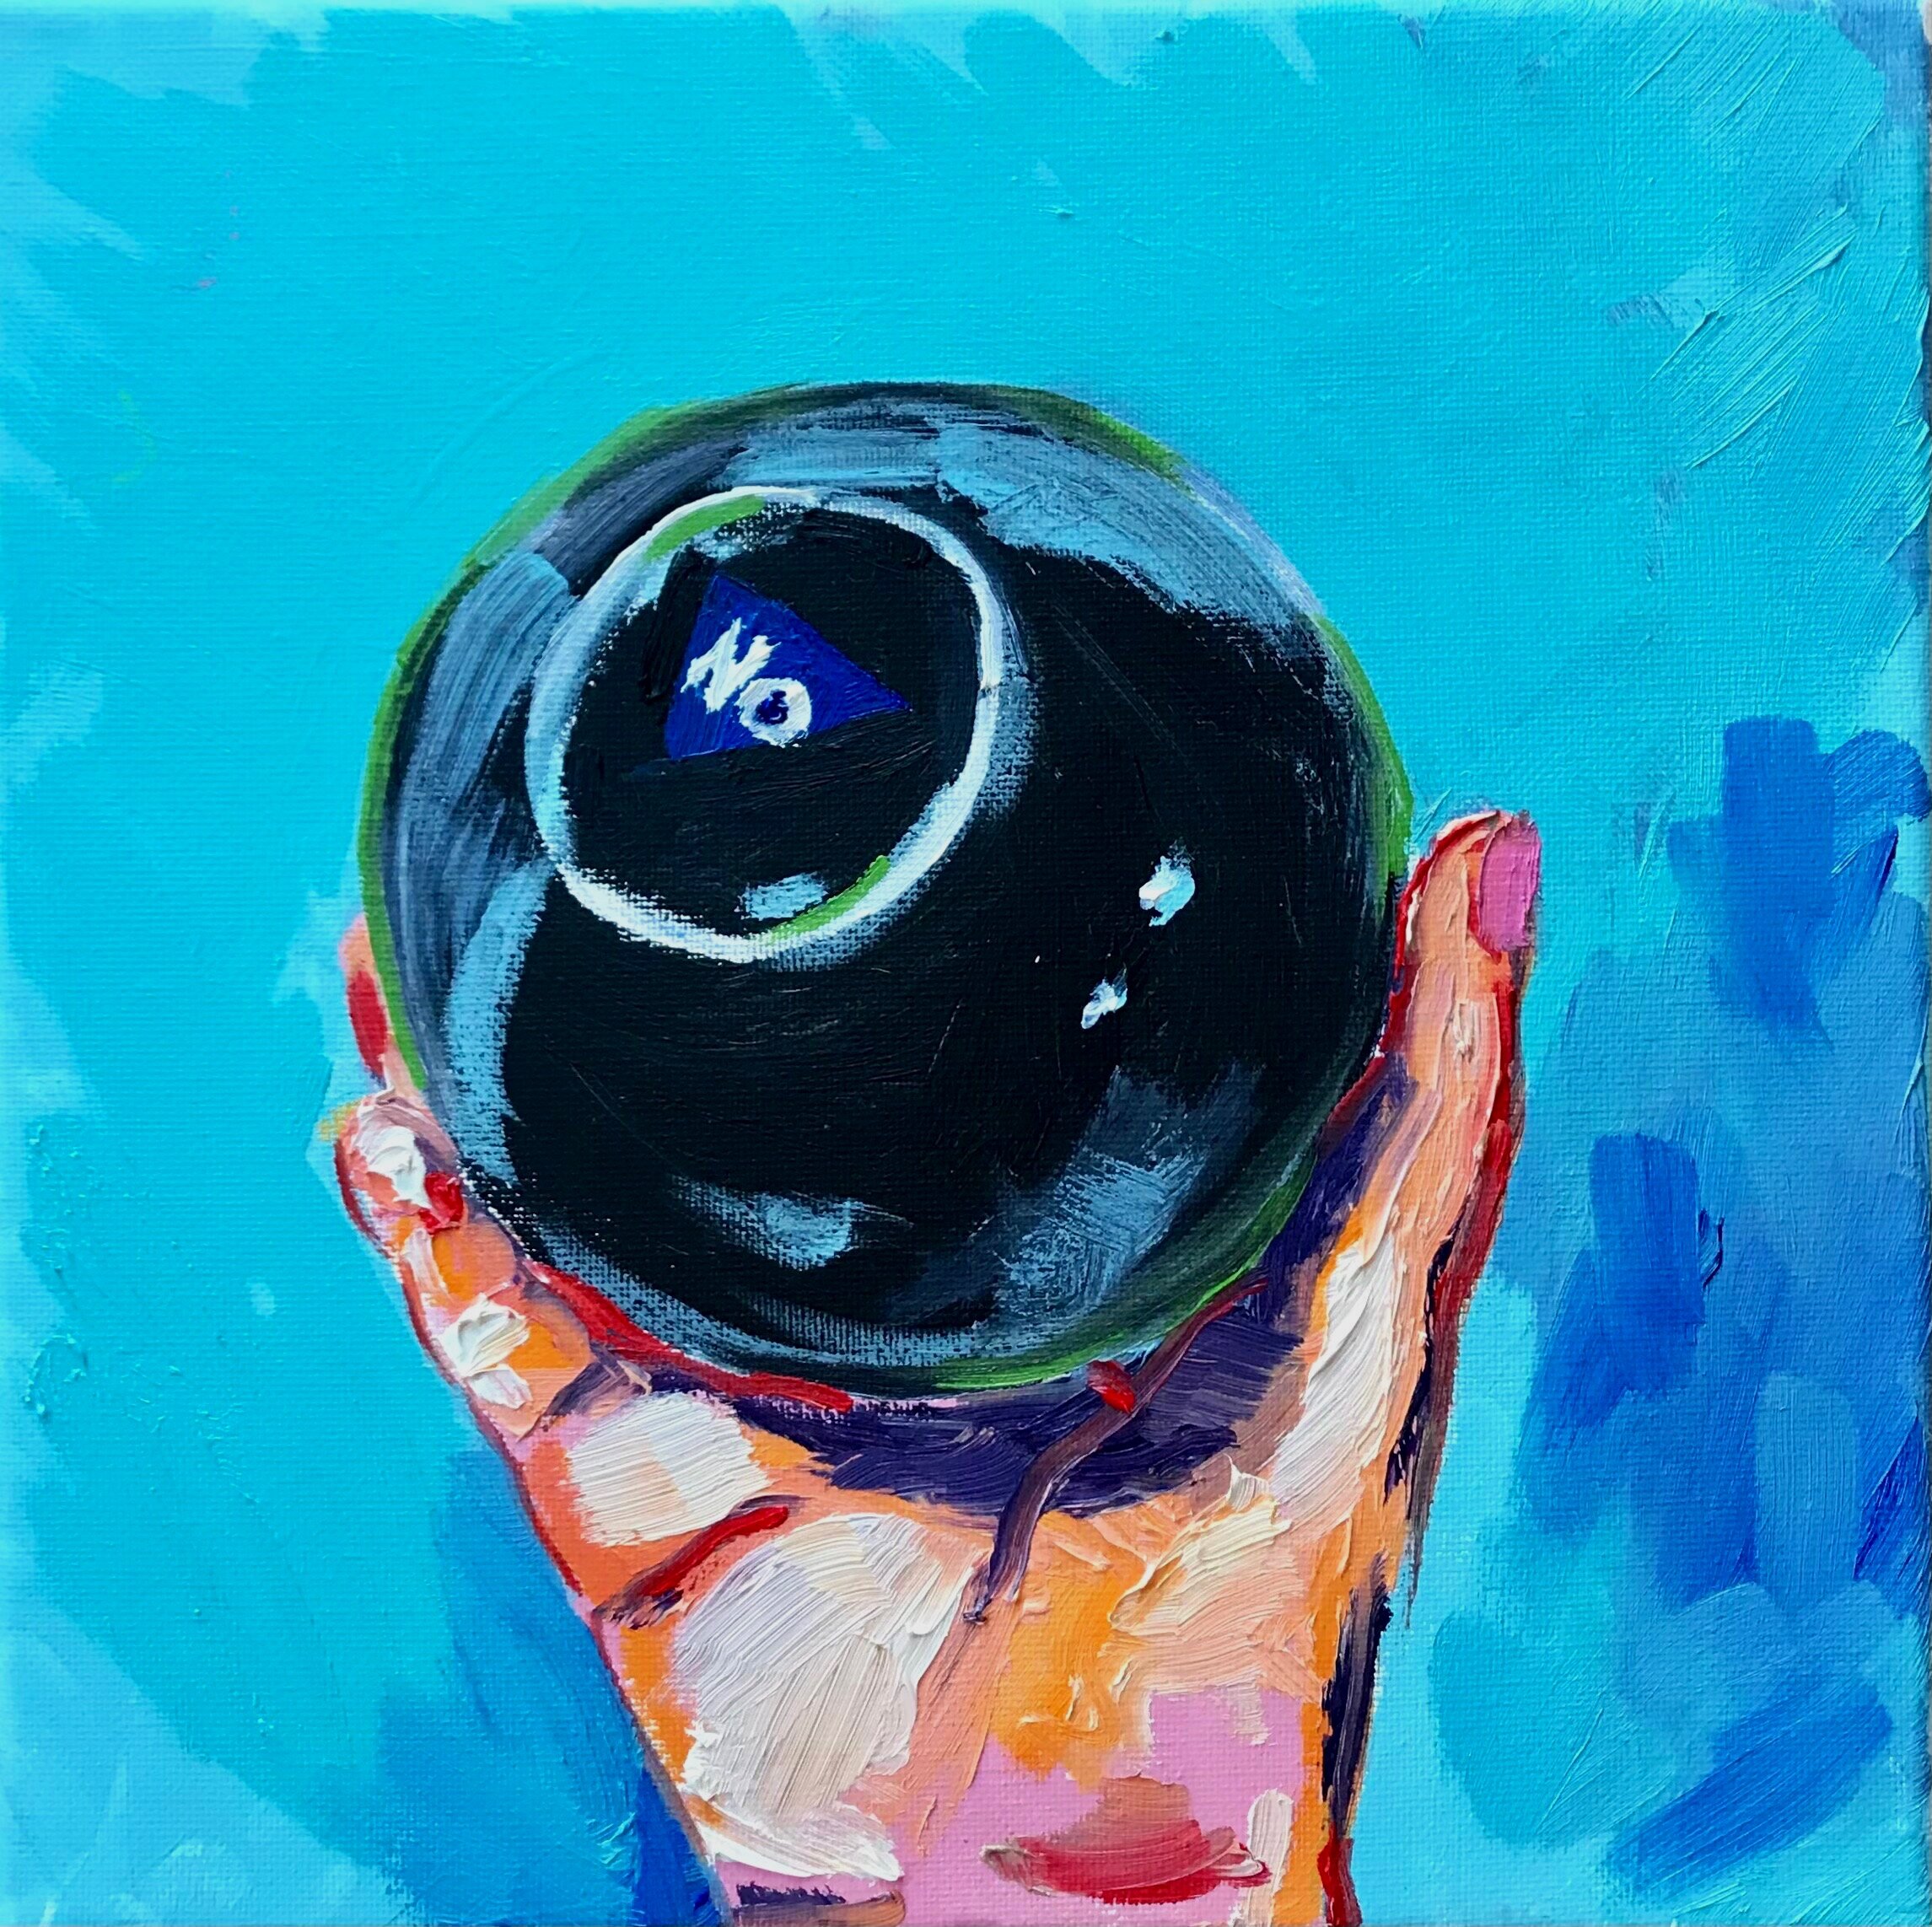  My Magic 8 Ball Warning Me About You  Oil Paint on Canvas  2021  10 inches x 10 inches 